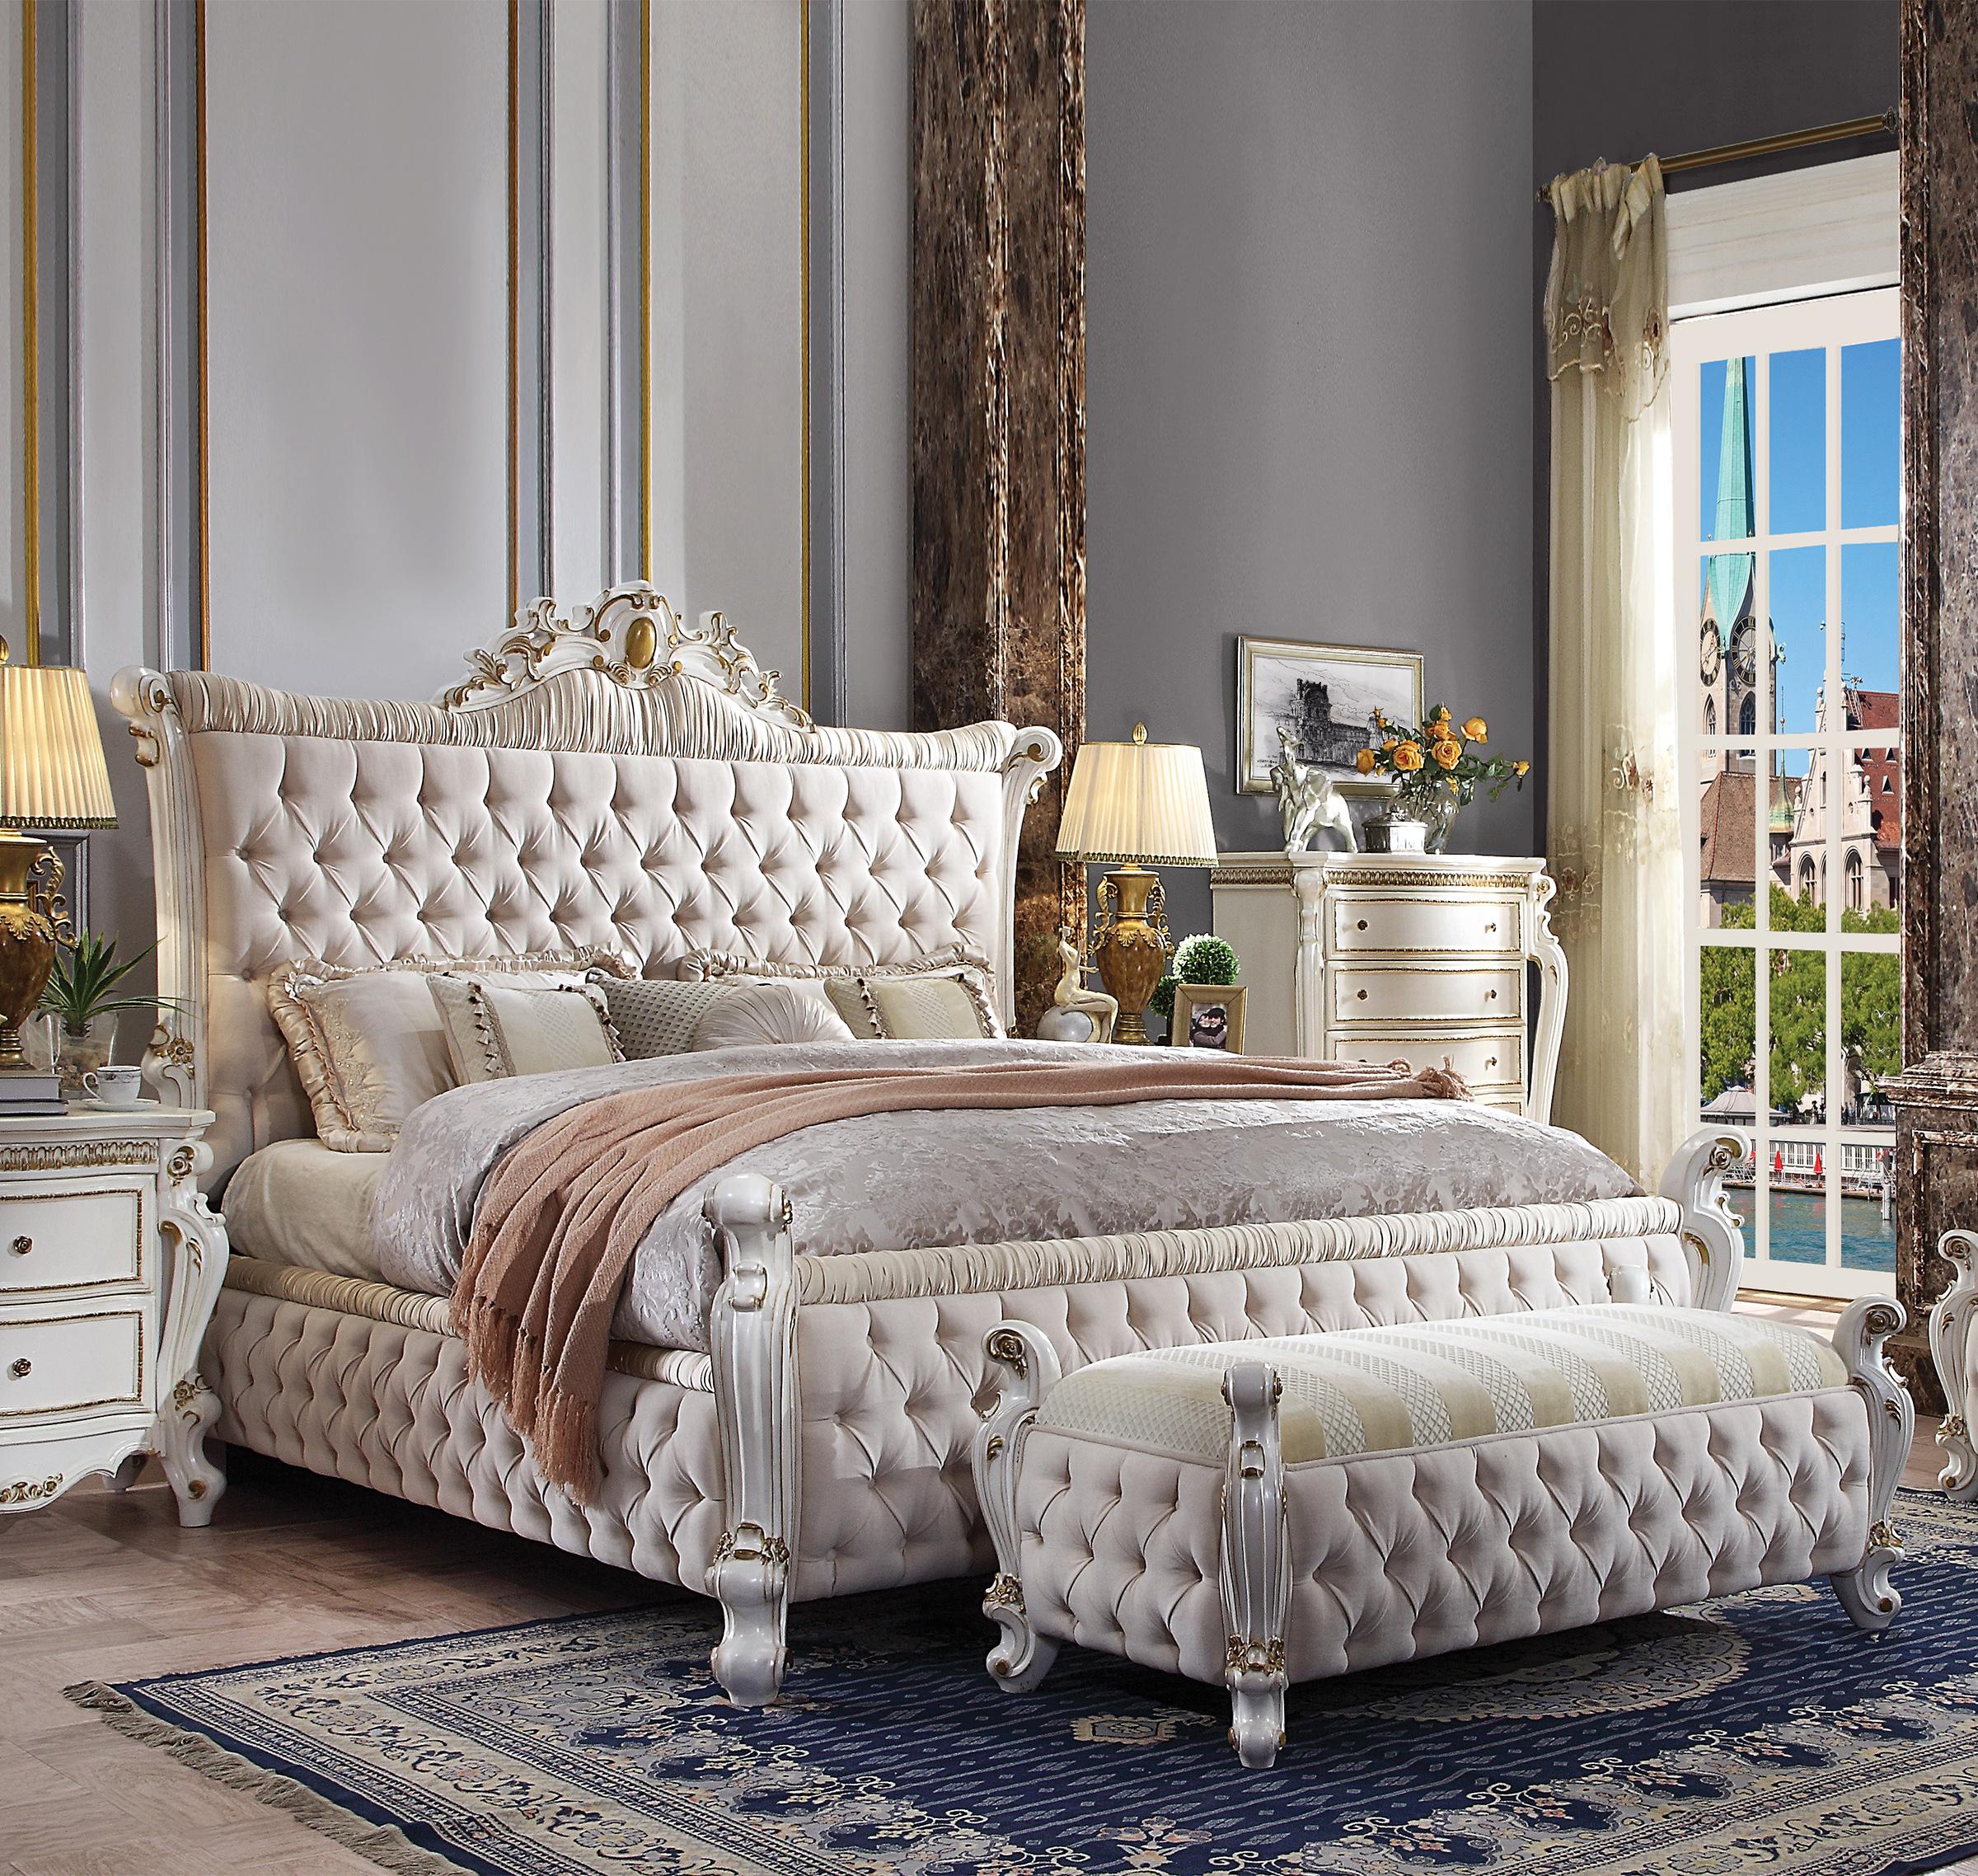 Classic, Traditional Panel Bed Picardy-27880Q Picardy-27880Q in Pearl, Antique Fabric